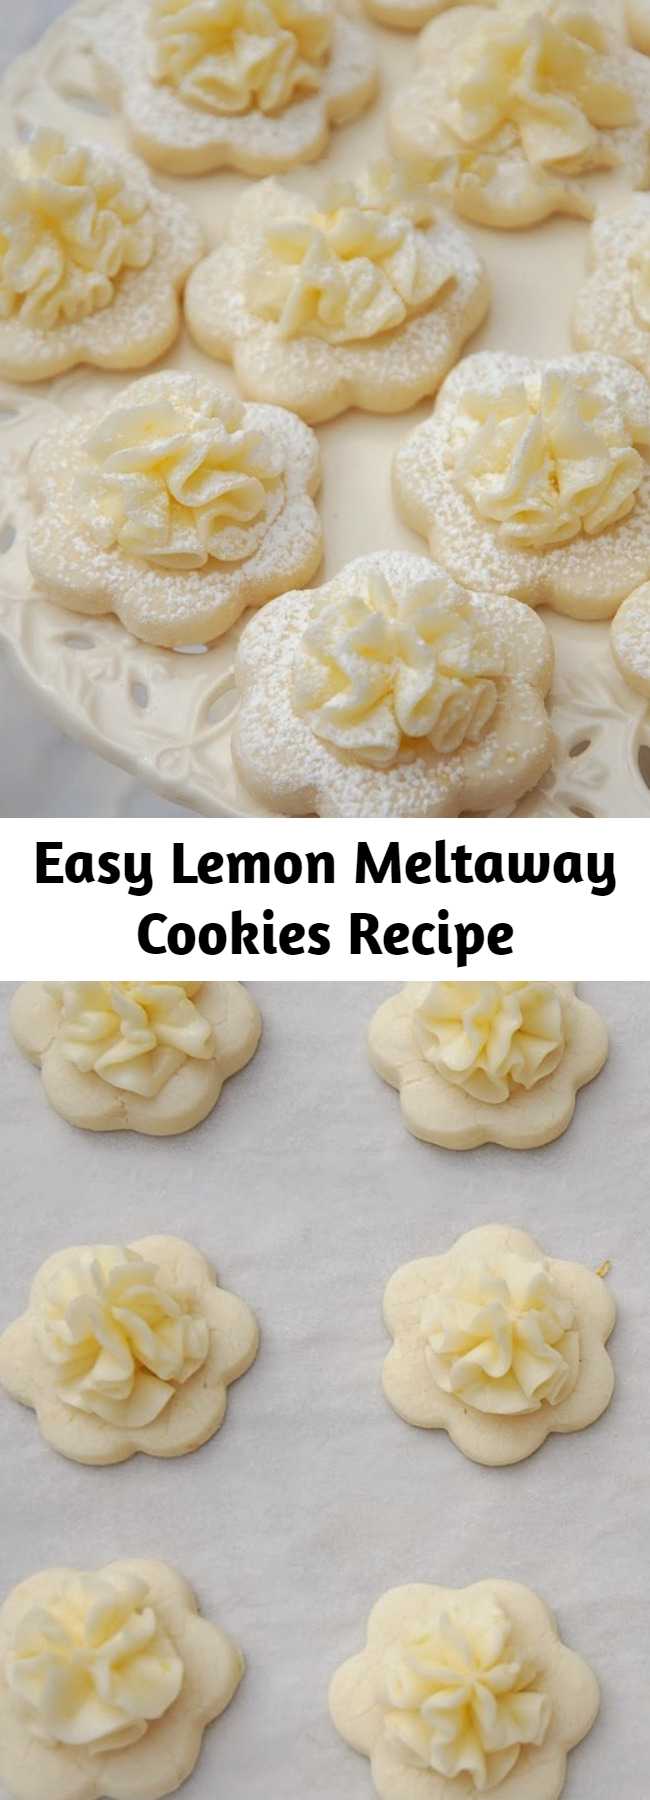 Easy Lemon Meltaway Cookies Recipe - What could be more lovely than Frilly Lemon Cookies at a Tea Party? I adore Lemon Meltaway Cookies and have been making them for Tea Parties for years.